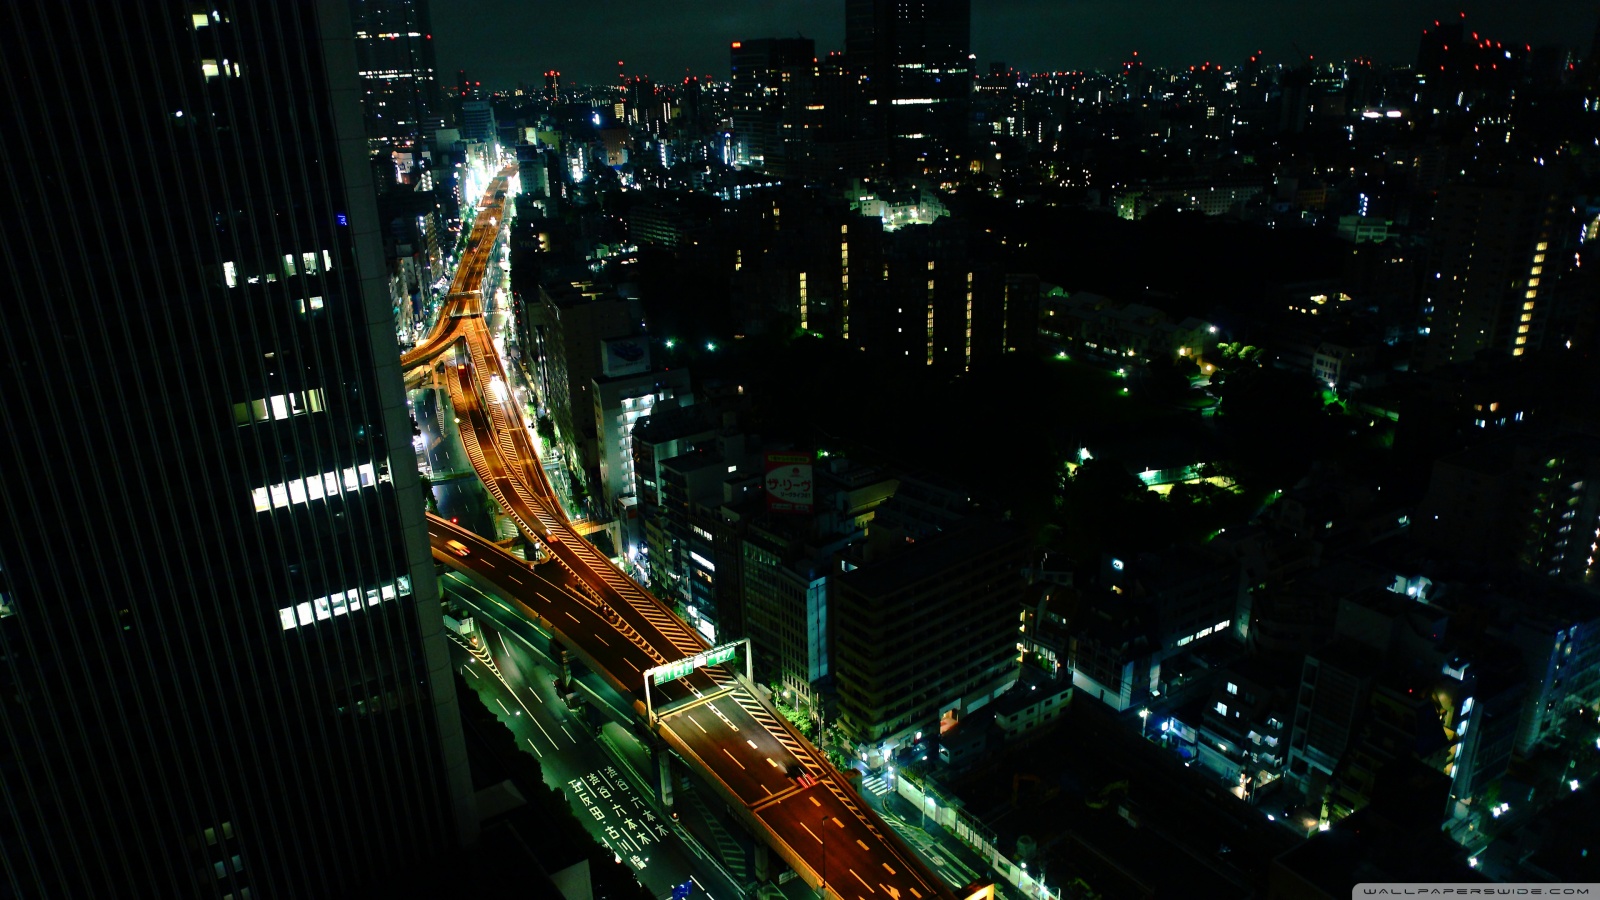 Night in the city of tokyo HD wallpaper download